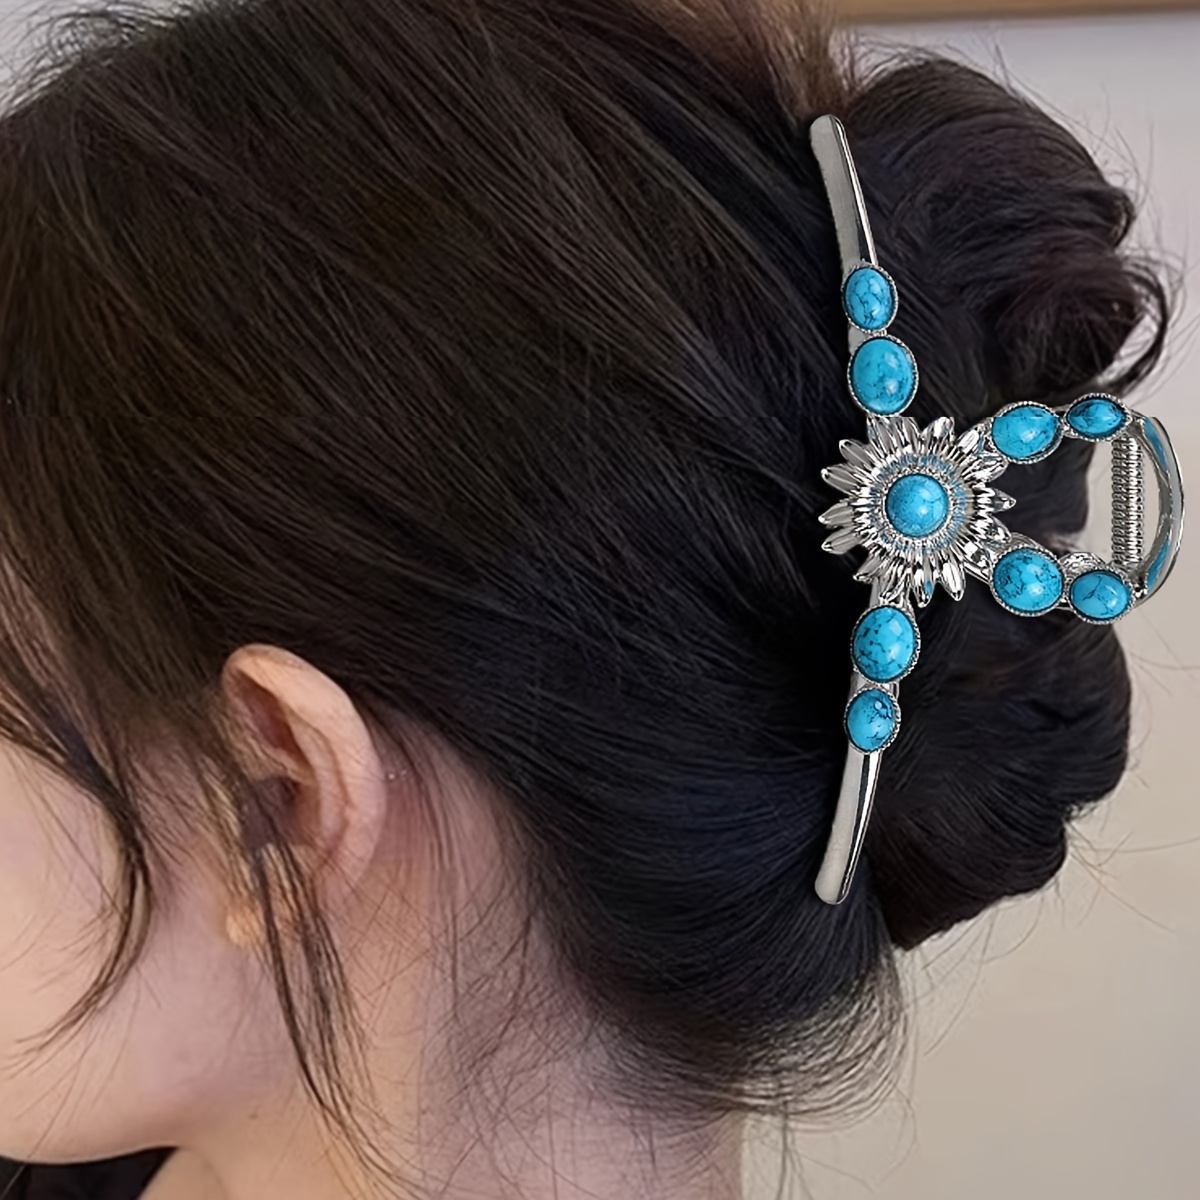 

Bohemian Style Sunflower Hair Claw Clip With Imitation Turquoise And Pearls, Vintage Alloy Large Oblong Shark Clip For Women, Boho Ethnic Hair Accessory For Girls Age 14+ - Single Piece